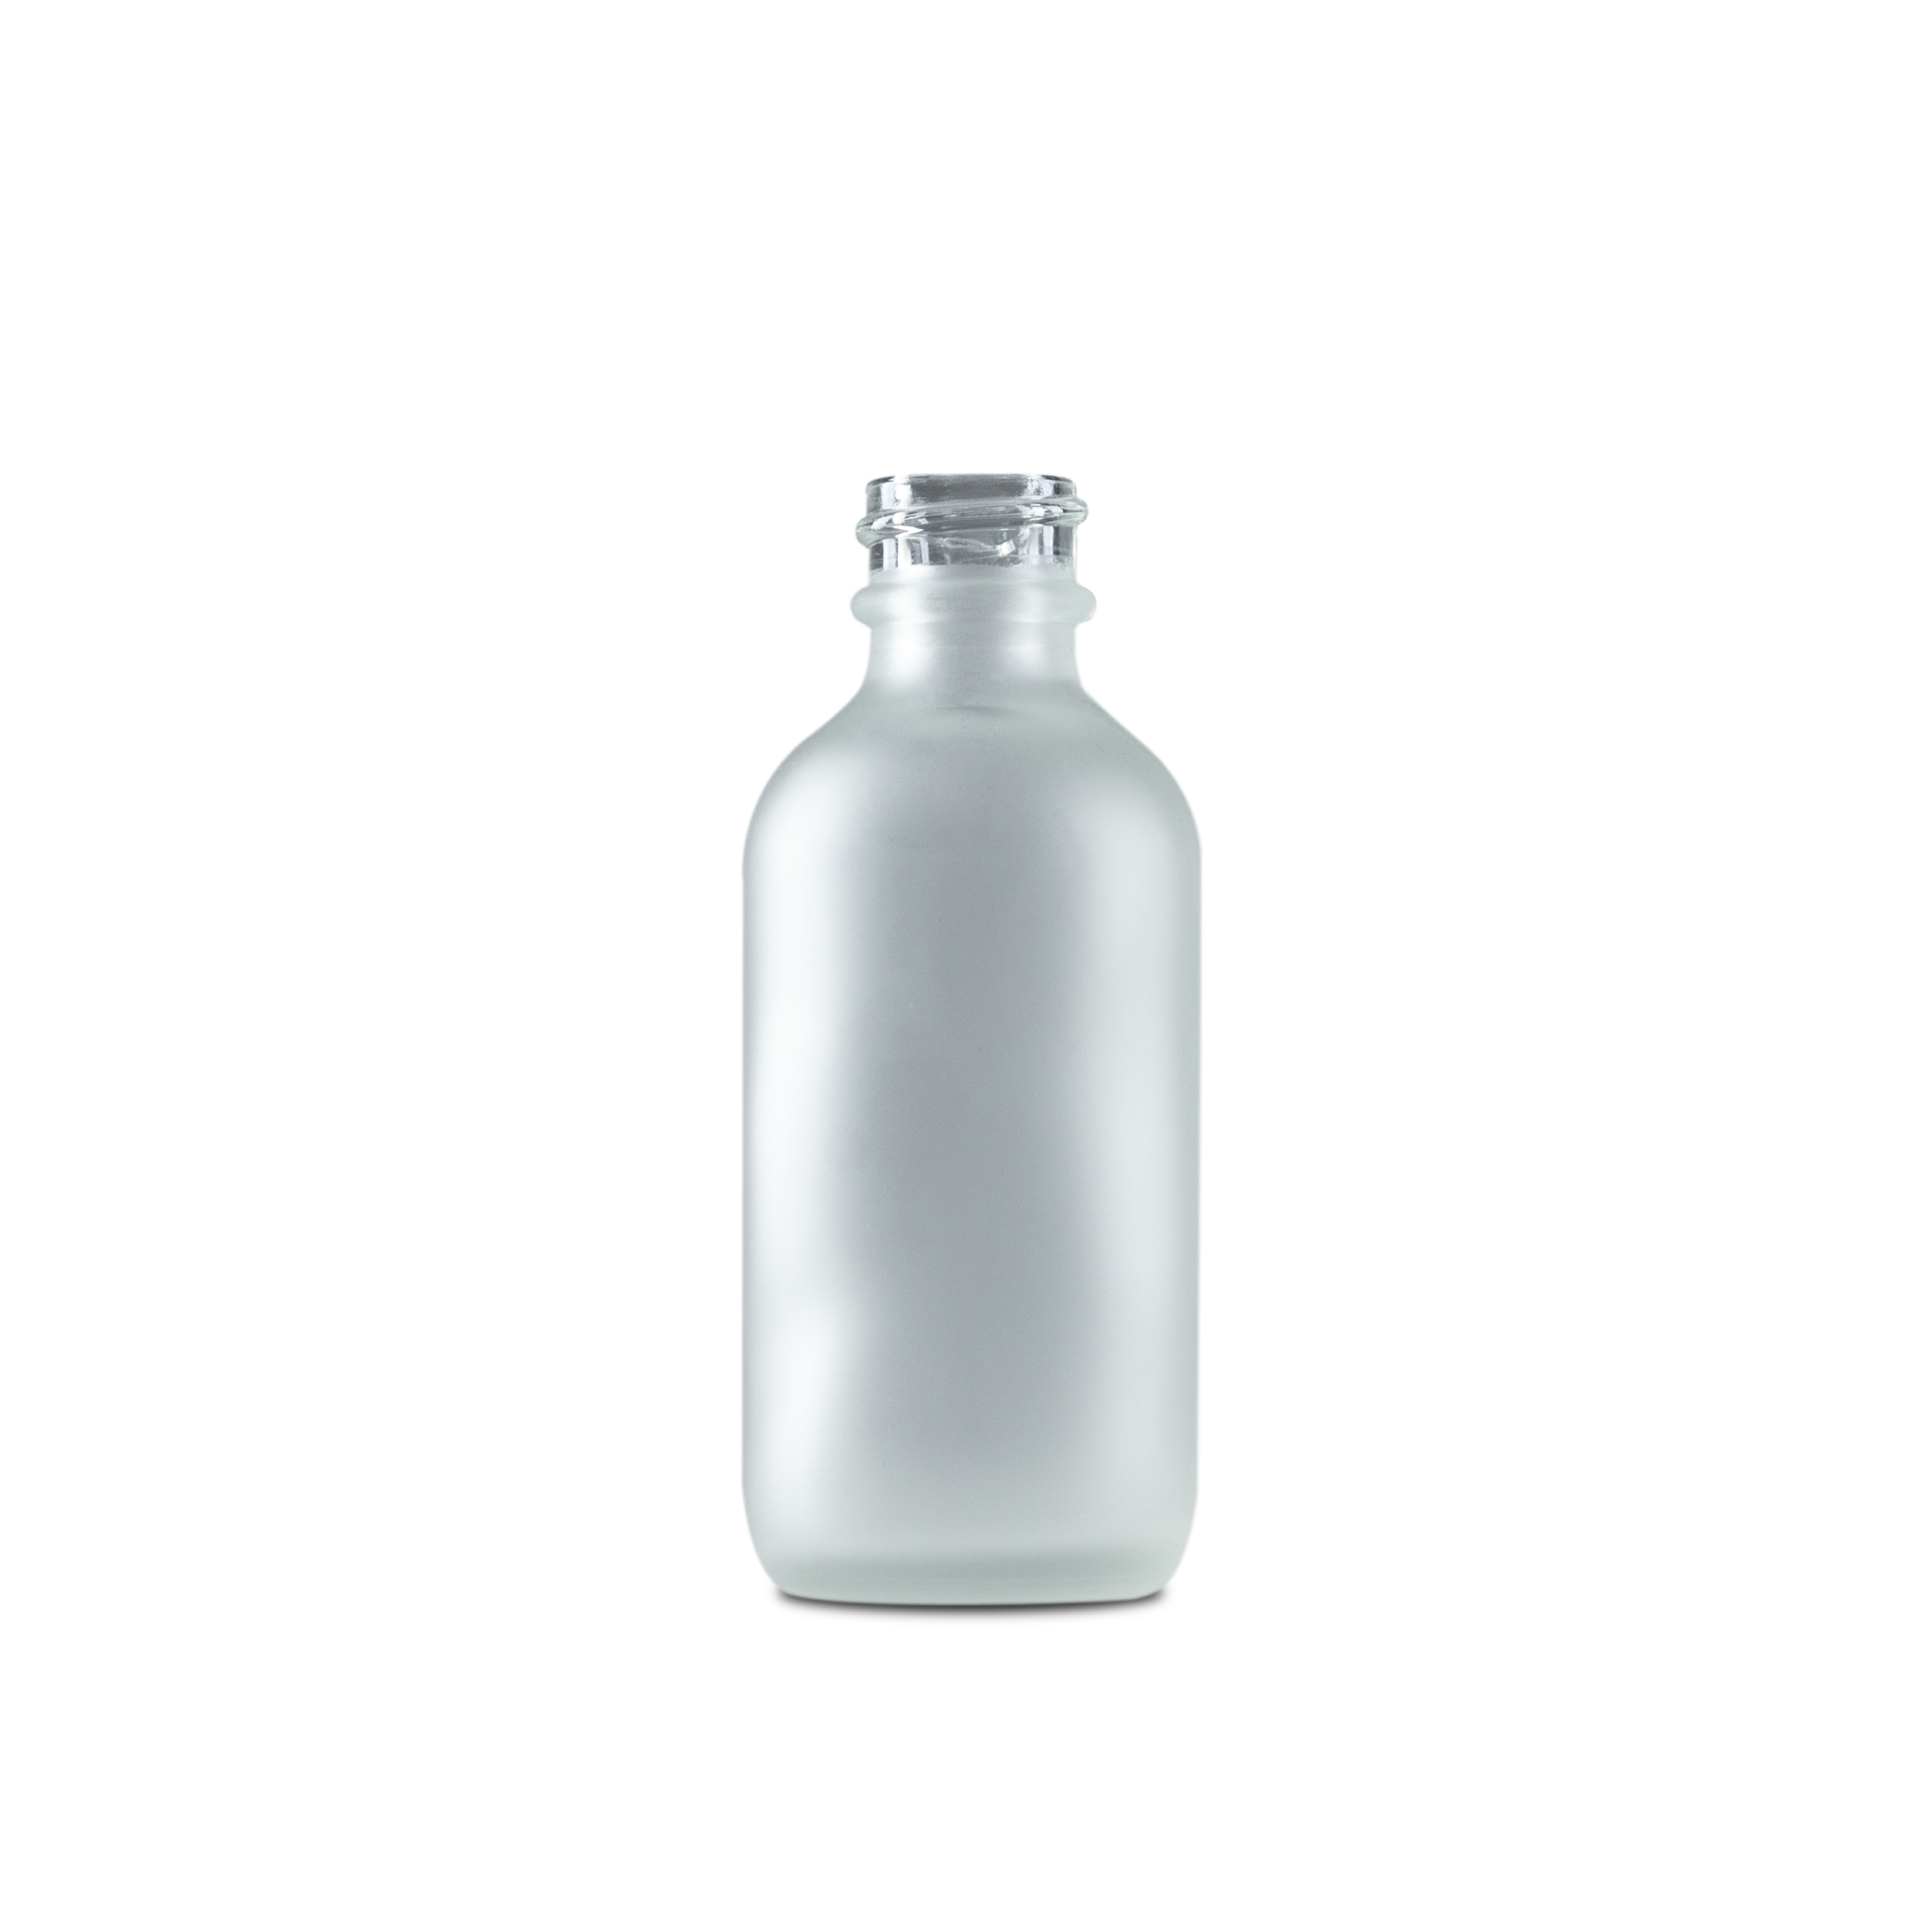 2 oz clear frosted fottles is perfect for packaging any beauty product. the frosted design will create a beautiful look for your products.